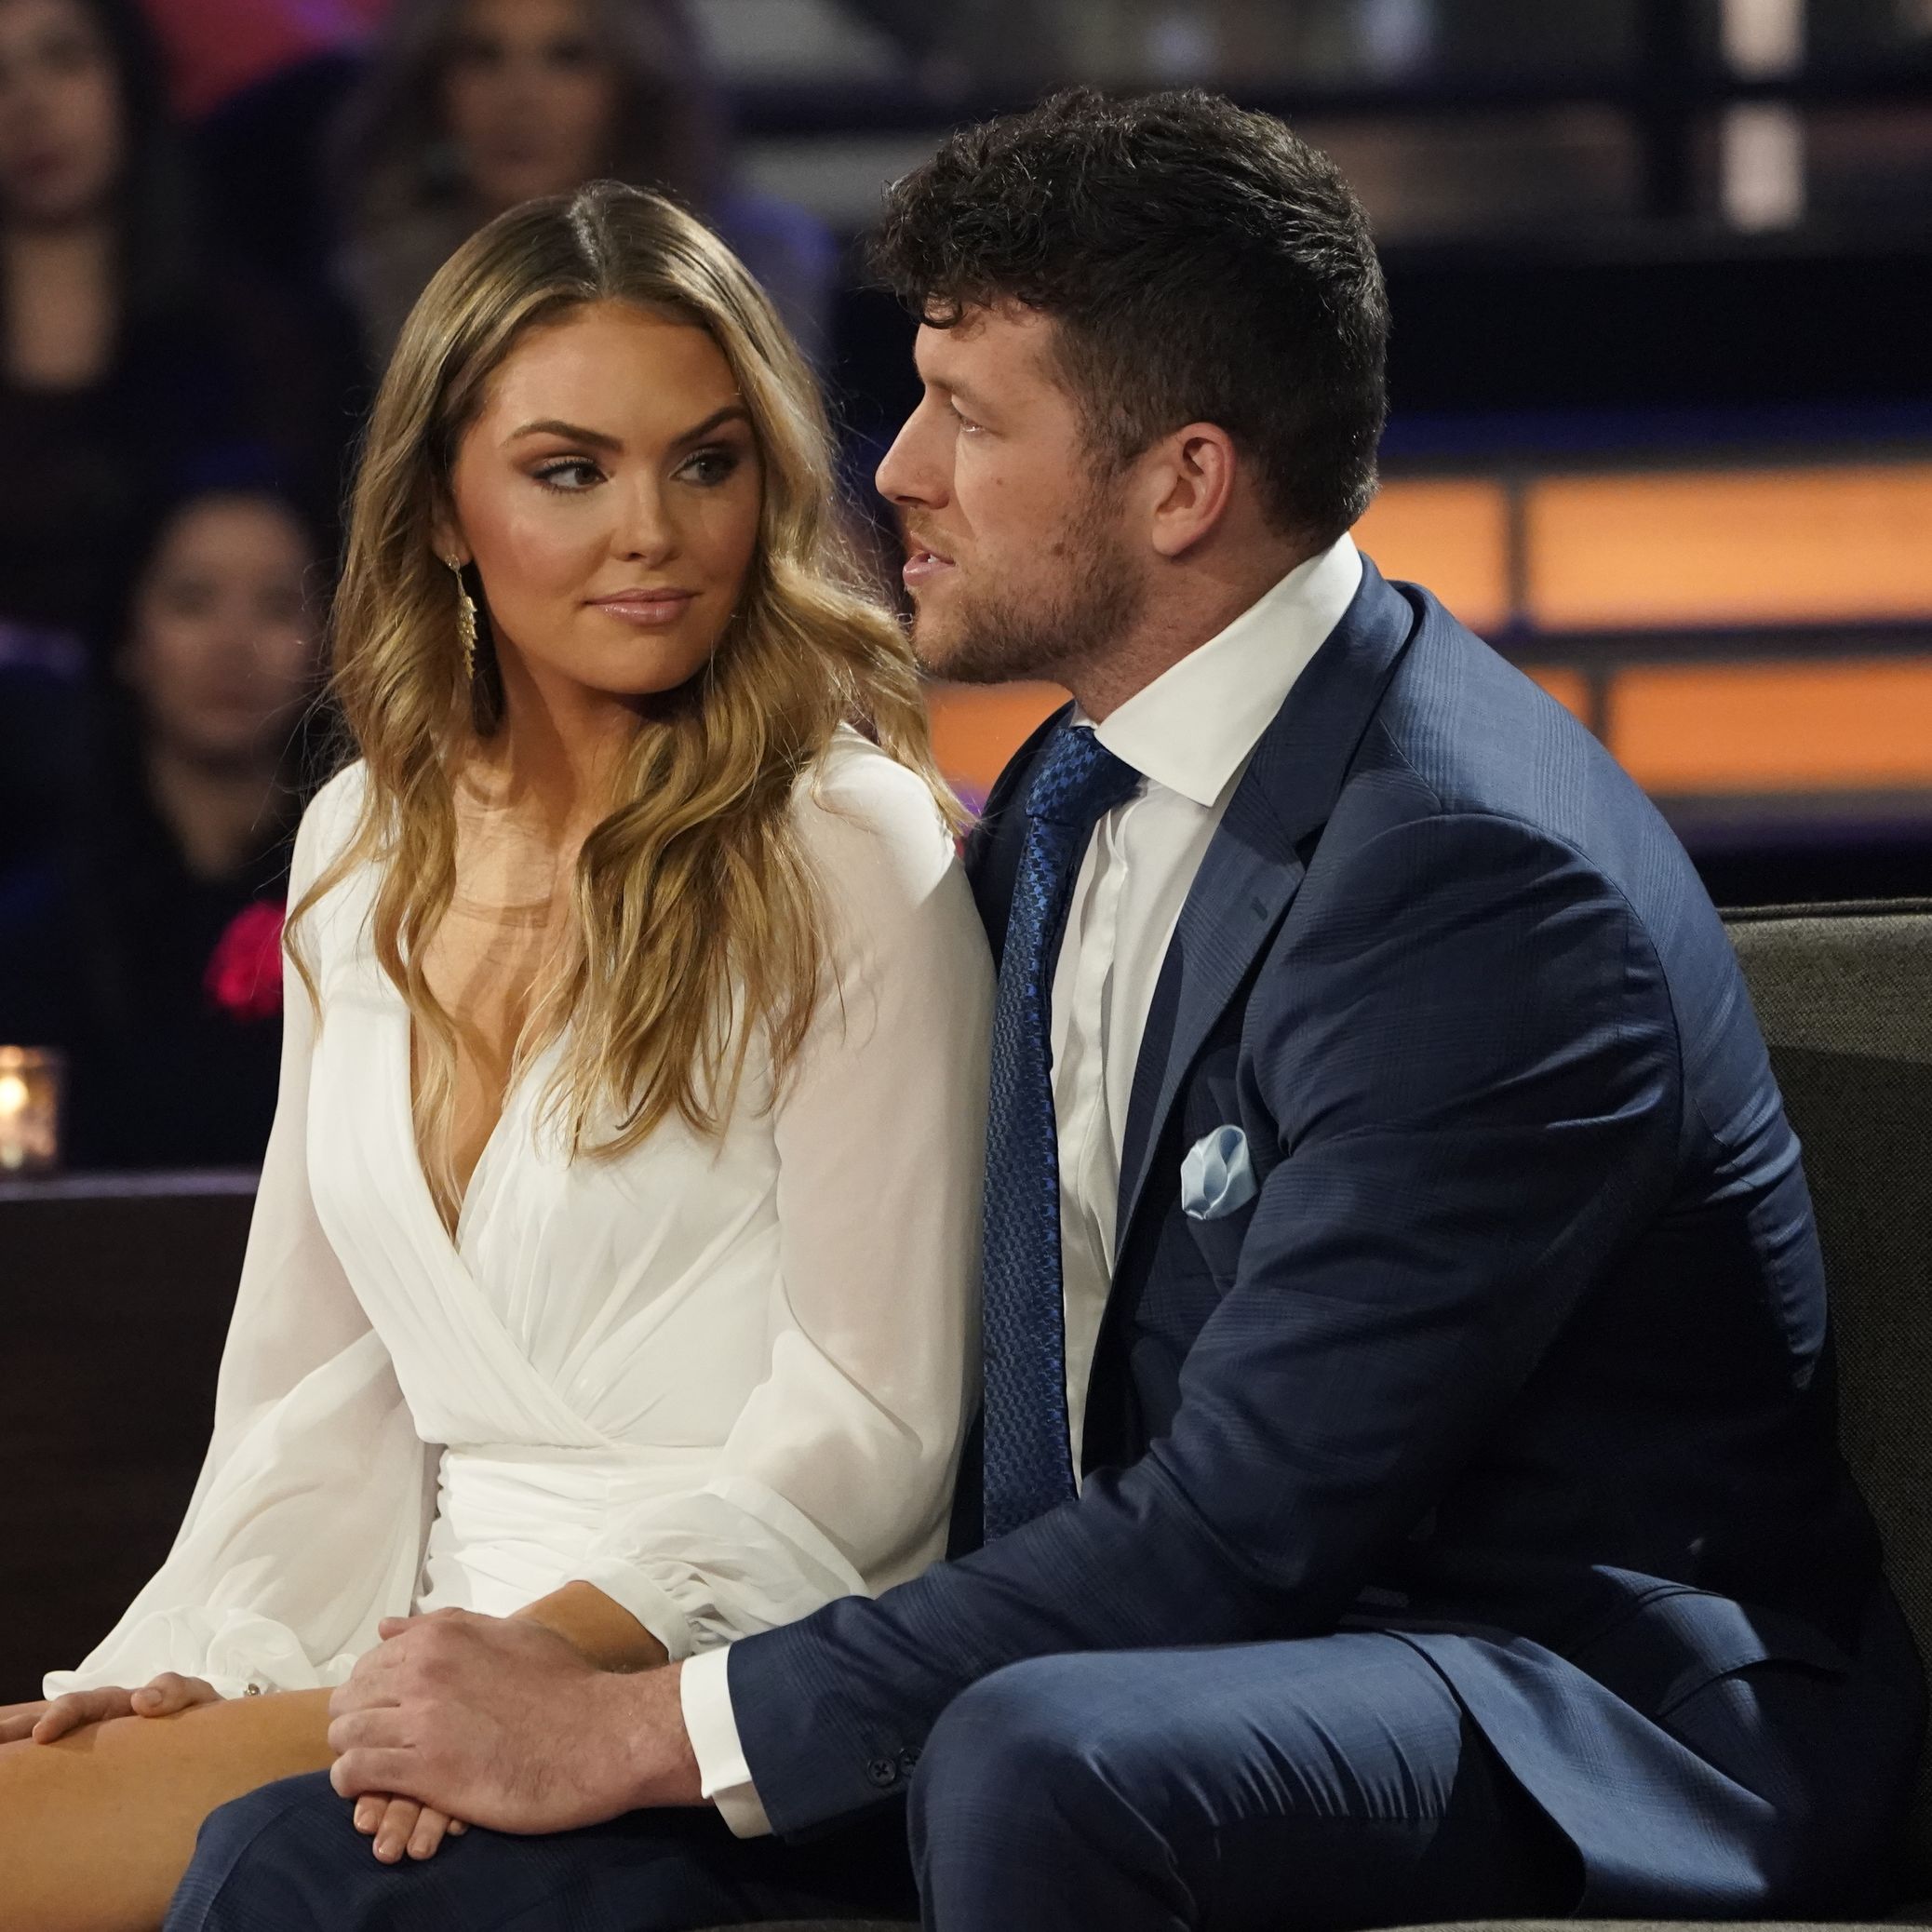 Bachelor Nation's Reaction to Susie Evans Taking Clayton Echard Back Is...Mixed